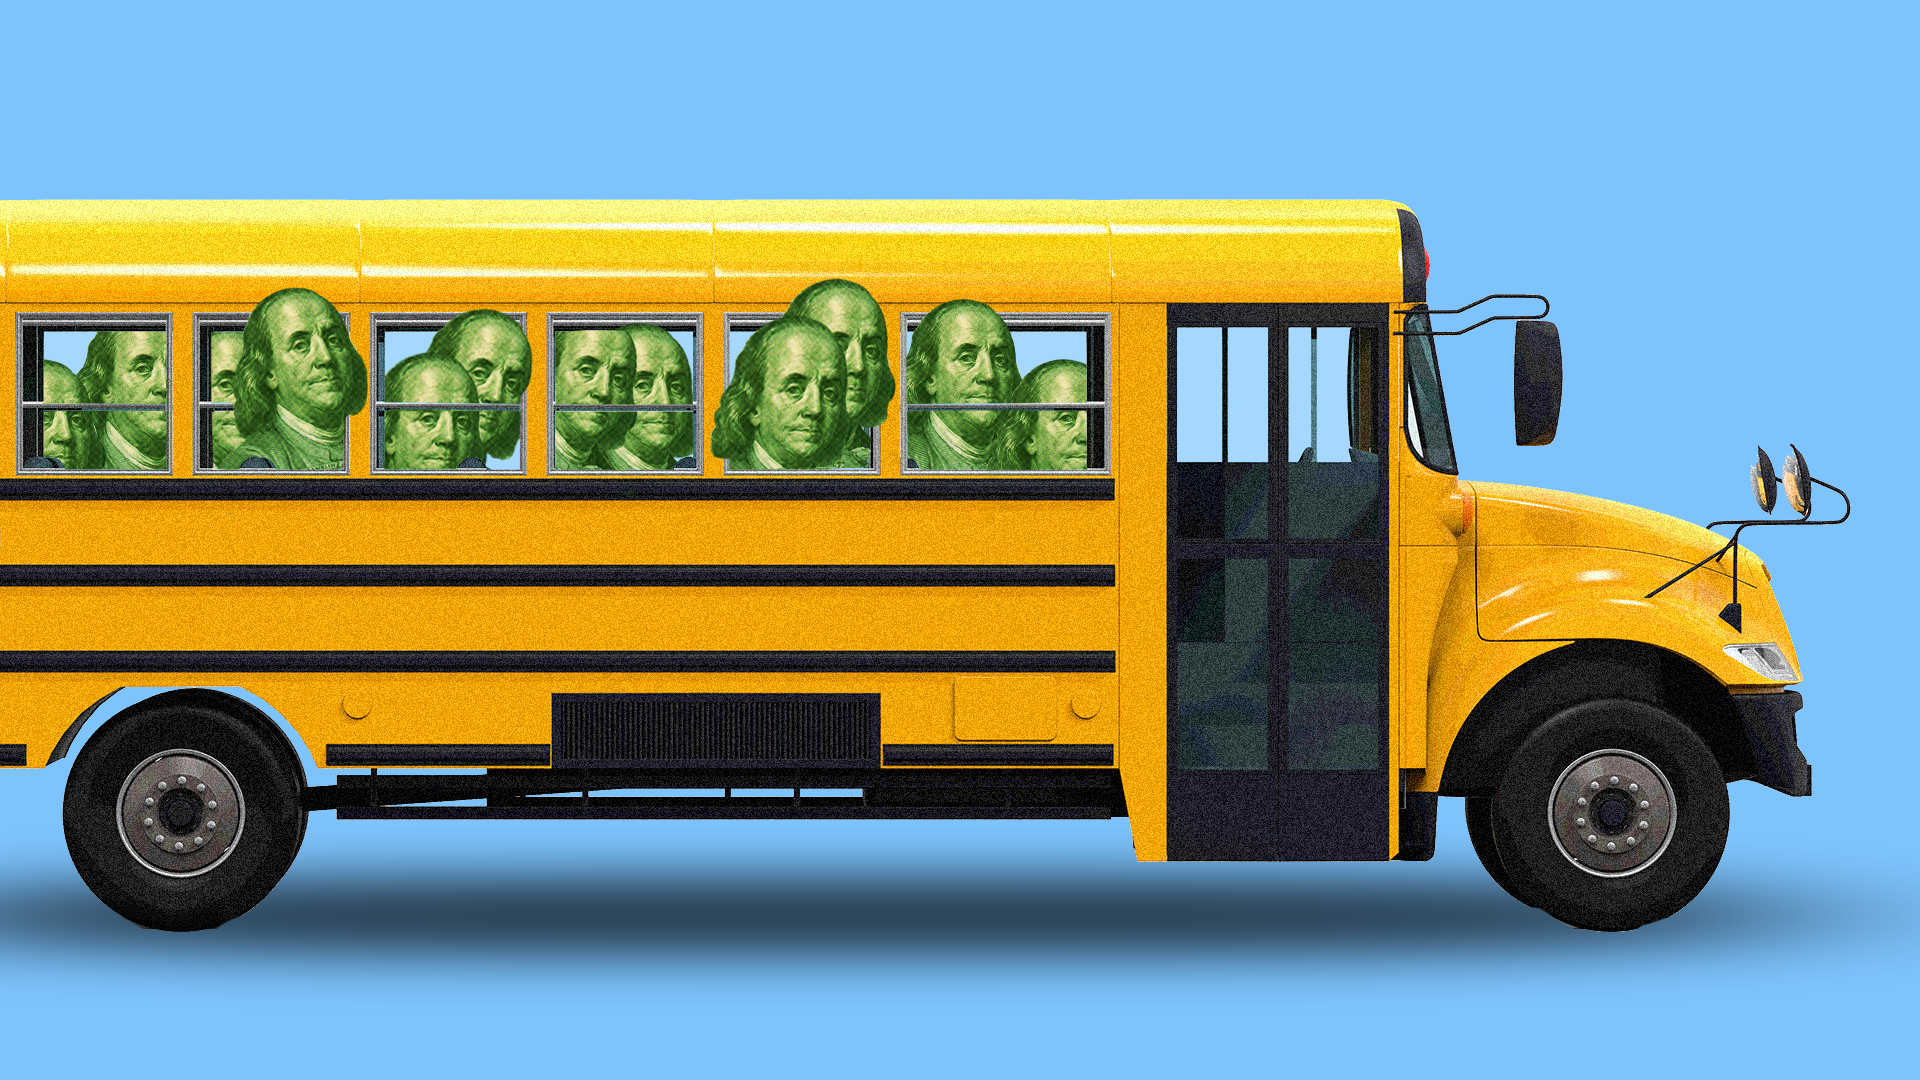 A school bus filled with George Washington heads.